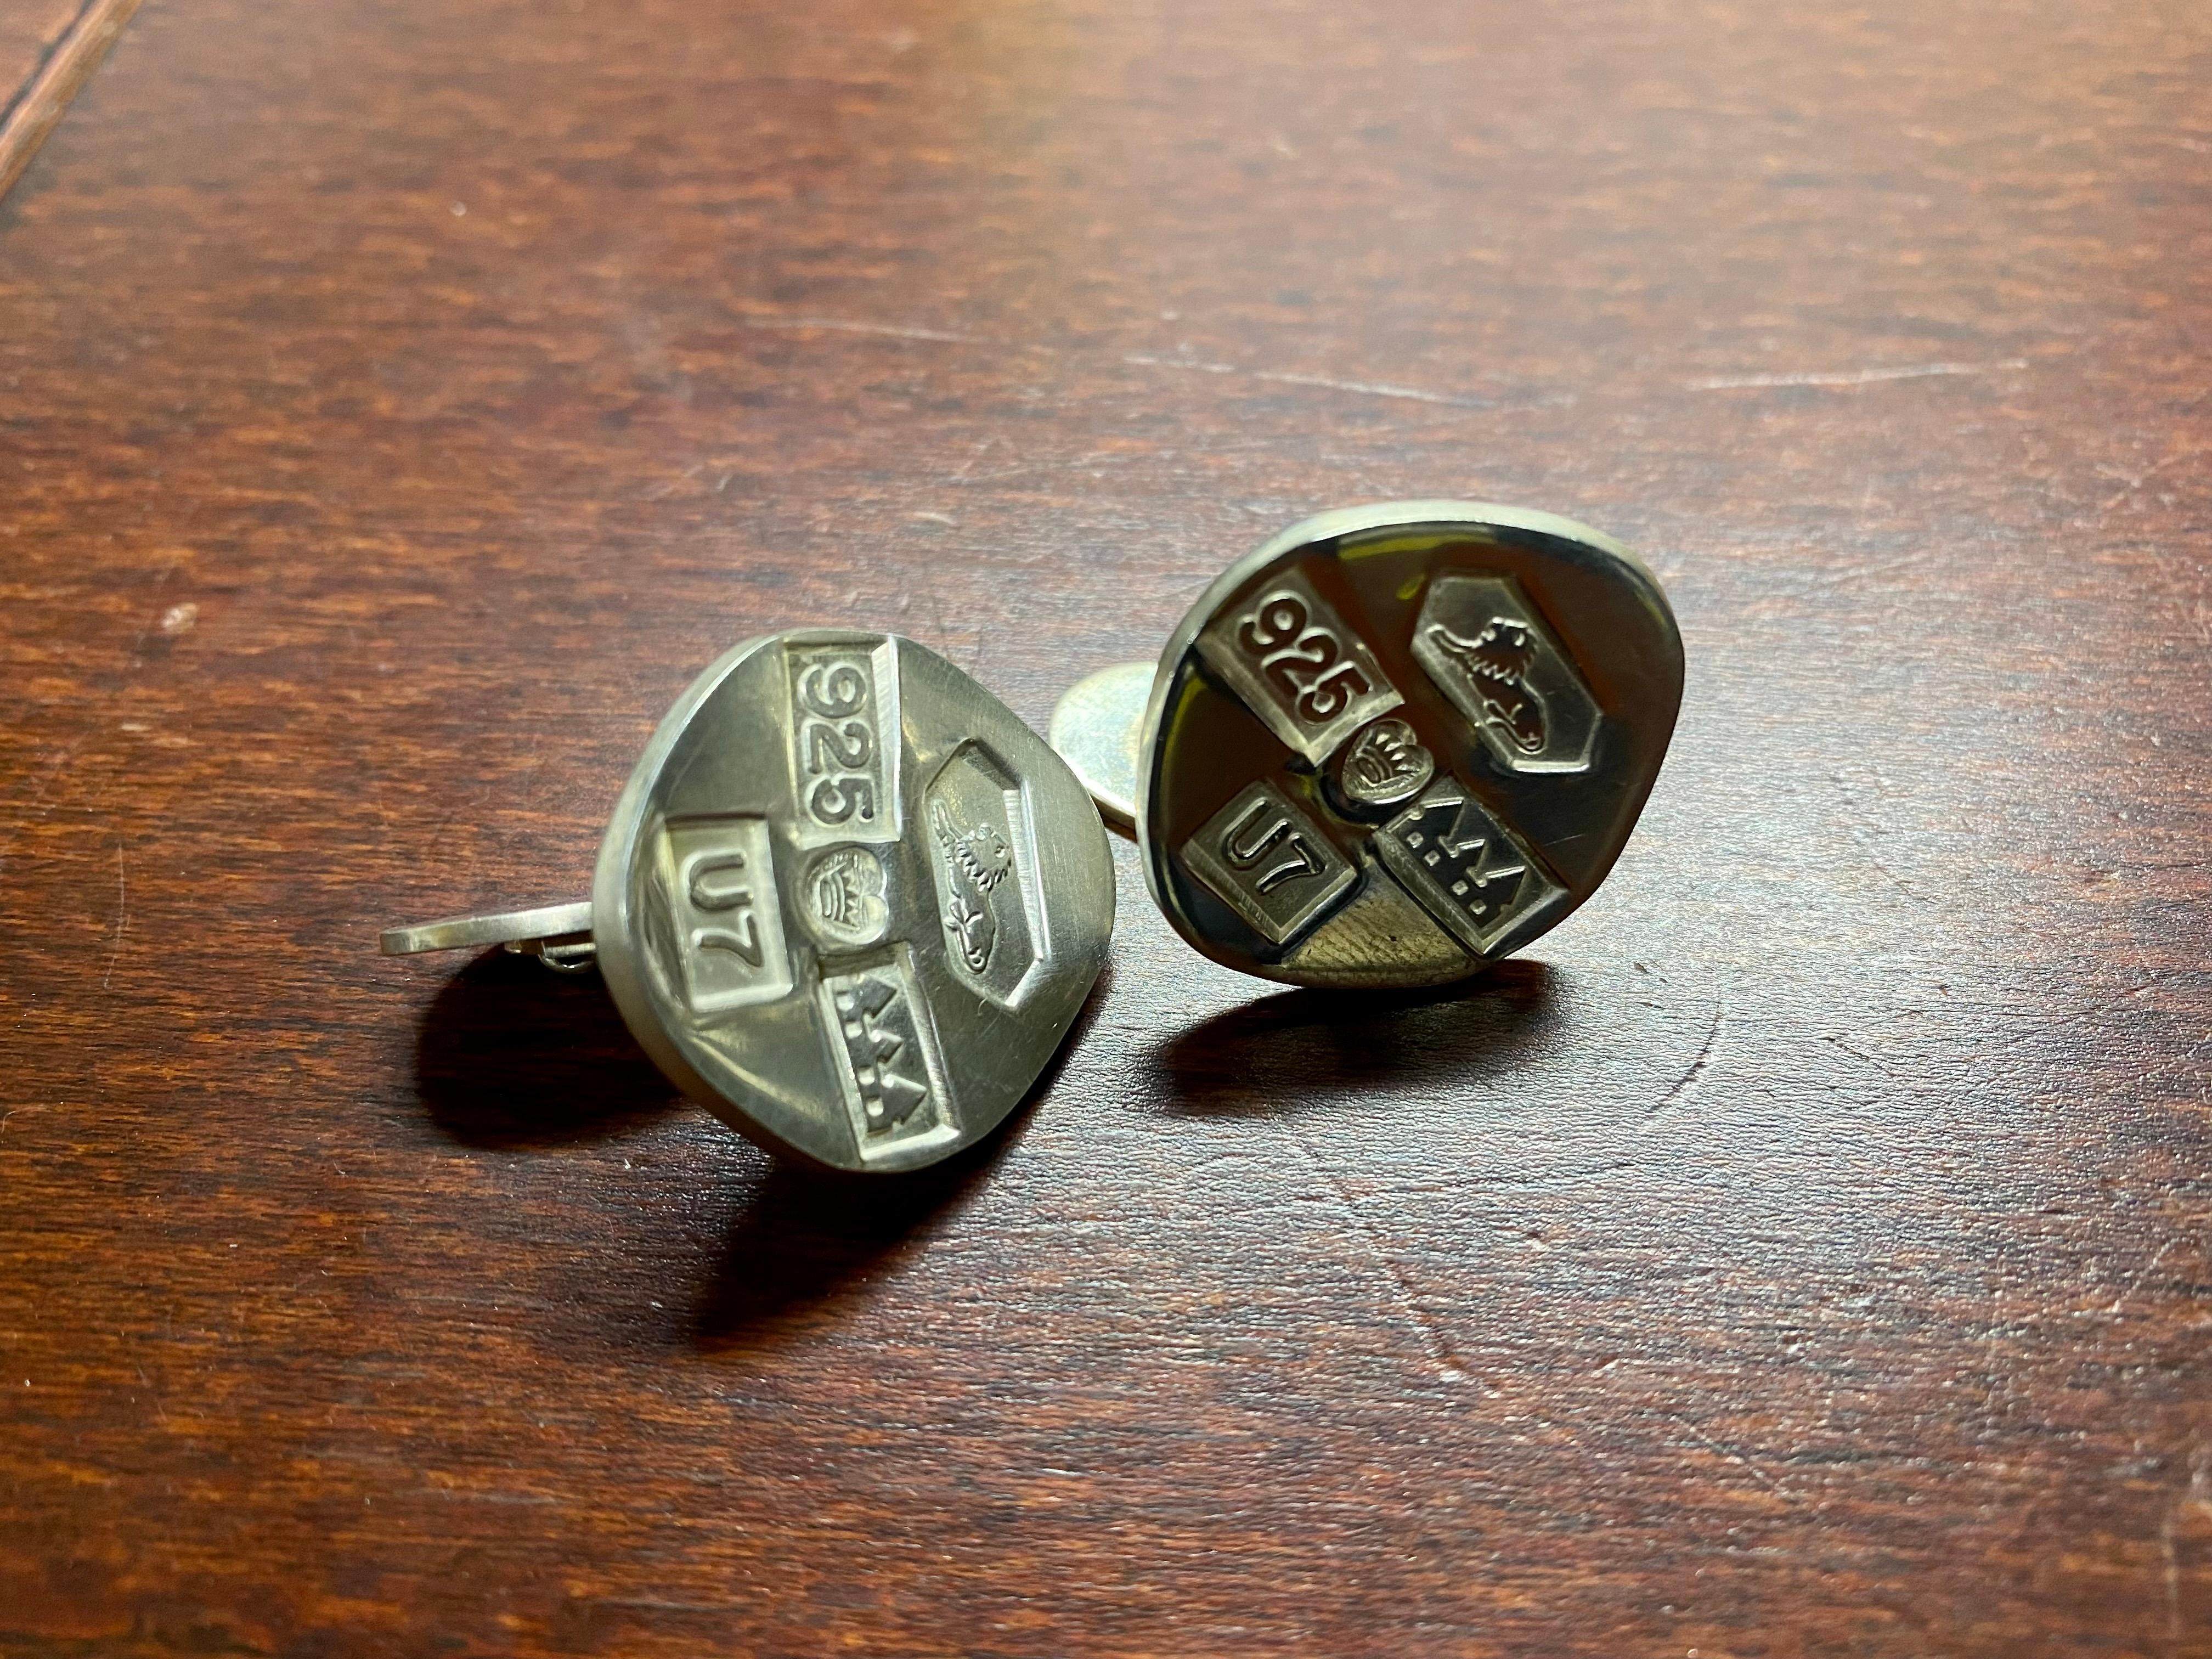 Sterling Silver cufflinks Owe Johansson Kultakeskus Hämeenlinna Finland 1973.
Really great.
Silver stamps just fine on the surface. 
OWE JOHANSSON
(b.1939) an internationally renowned Swedish silversmith, designer. Started his career in 1965, gained